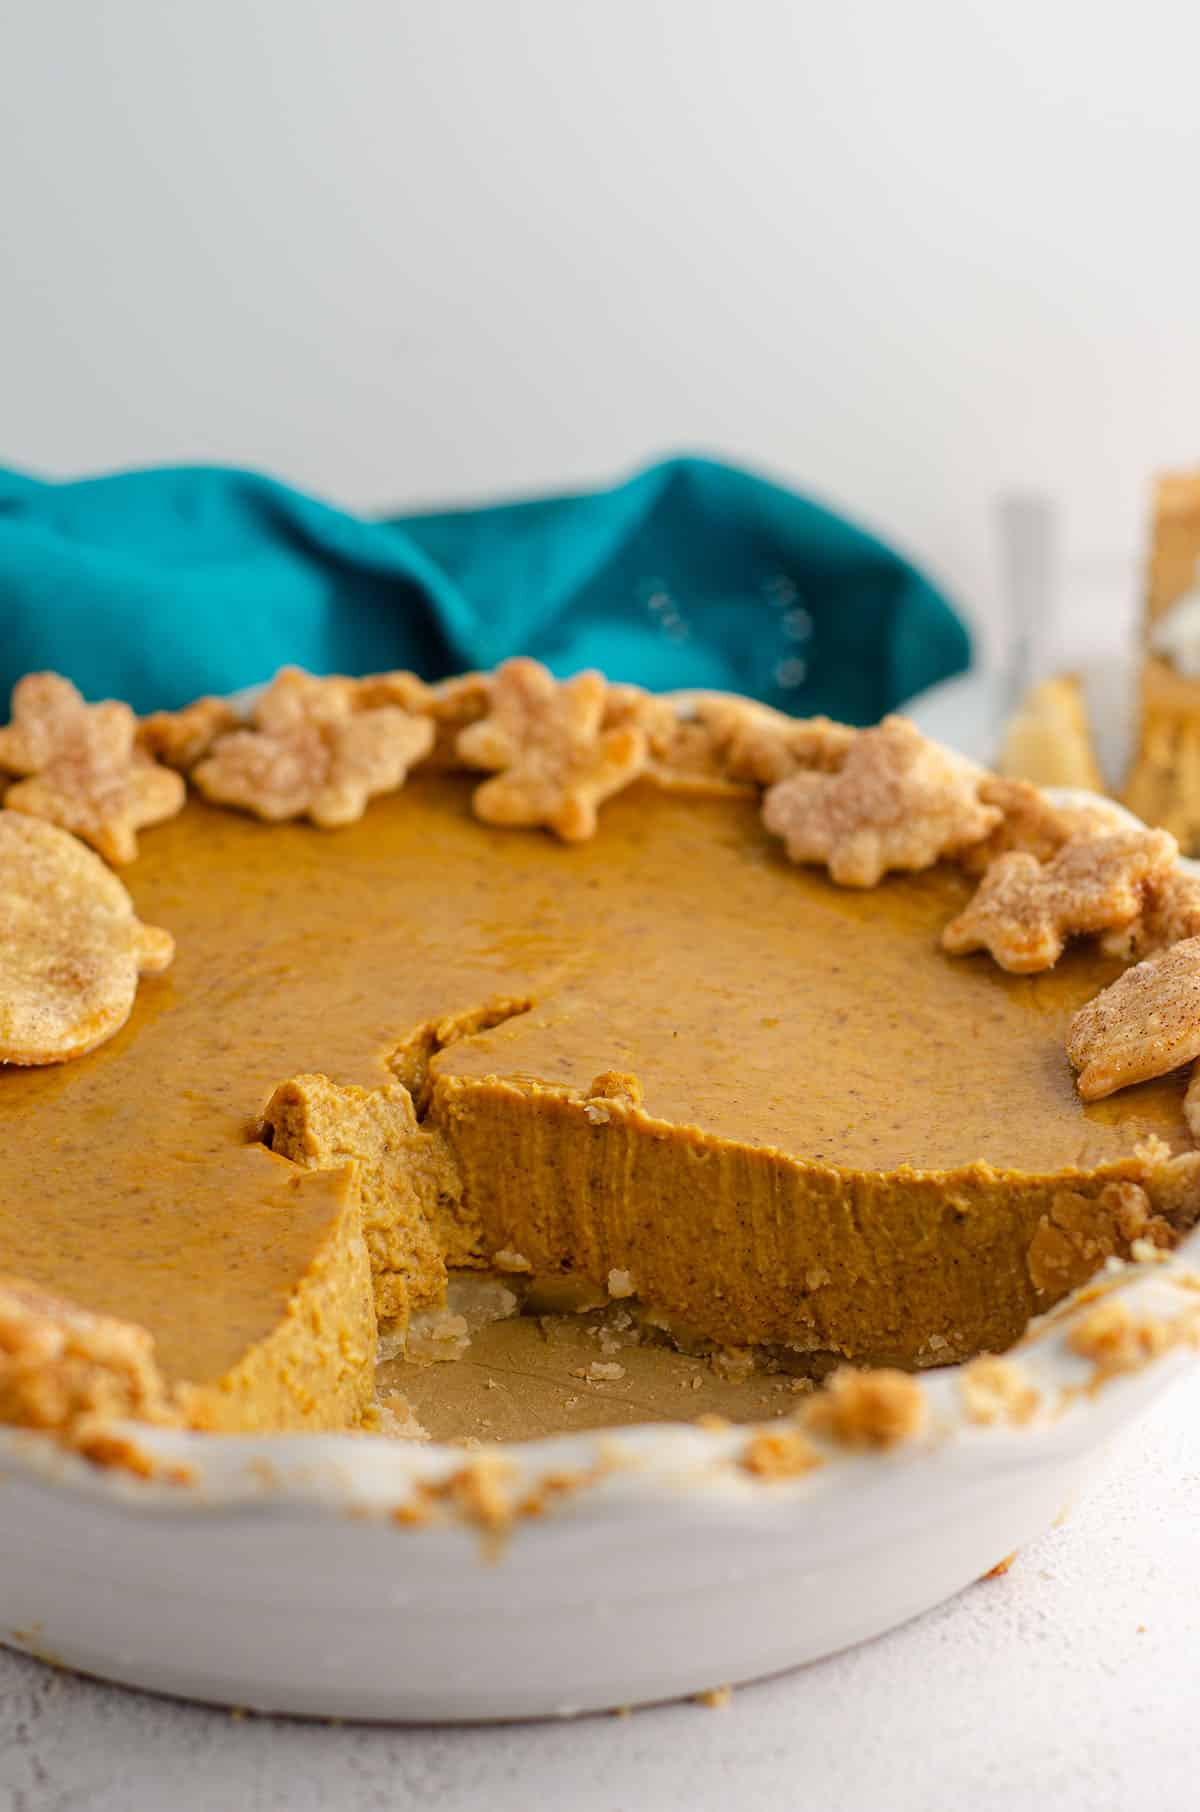 pumpkin pie with some slices removed